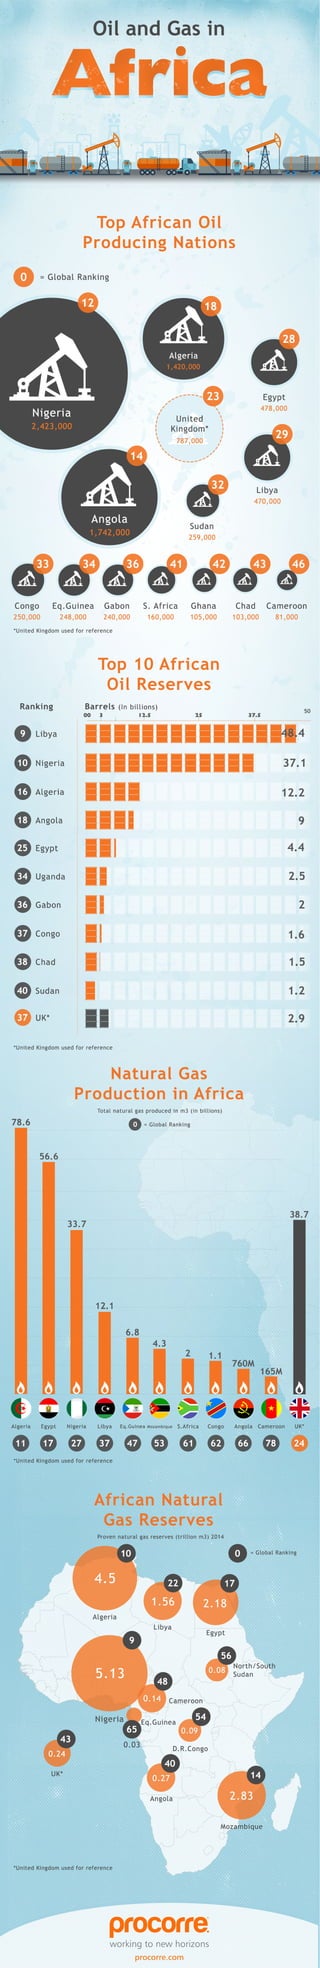 Oil and Gas in Africa infographic